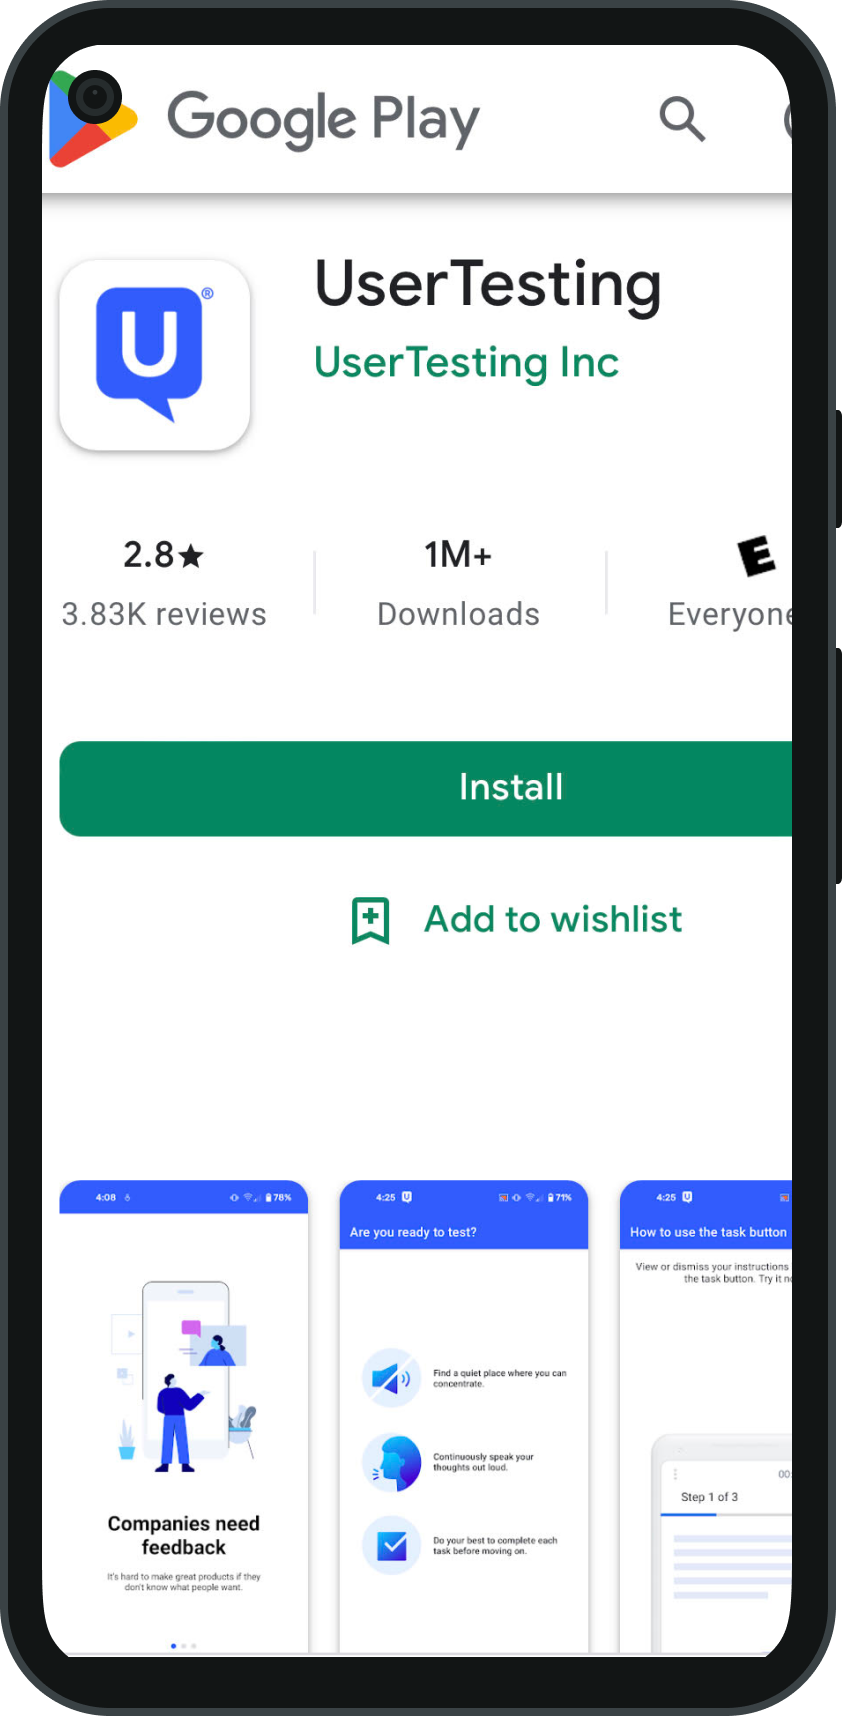 The UserTesting mobile app listing in the Google Play Store